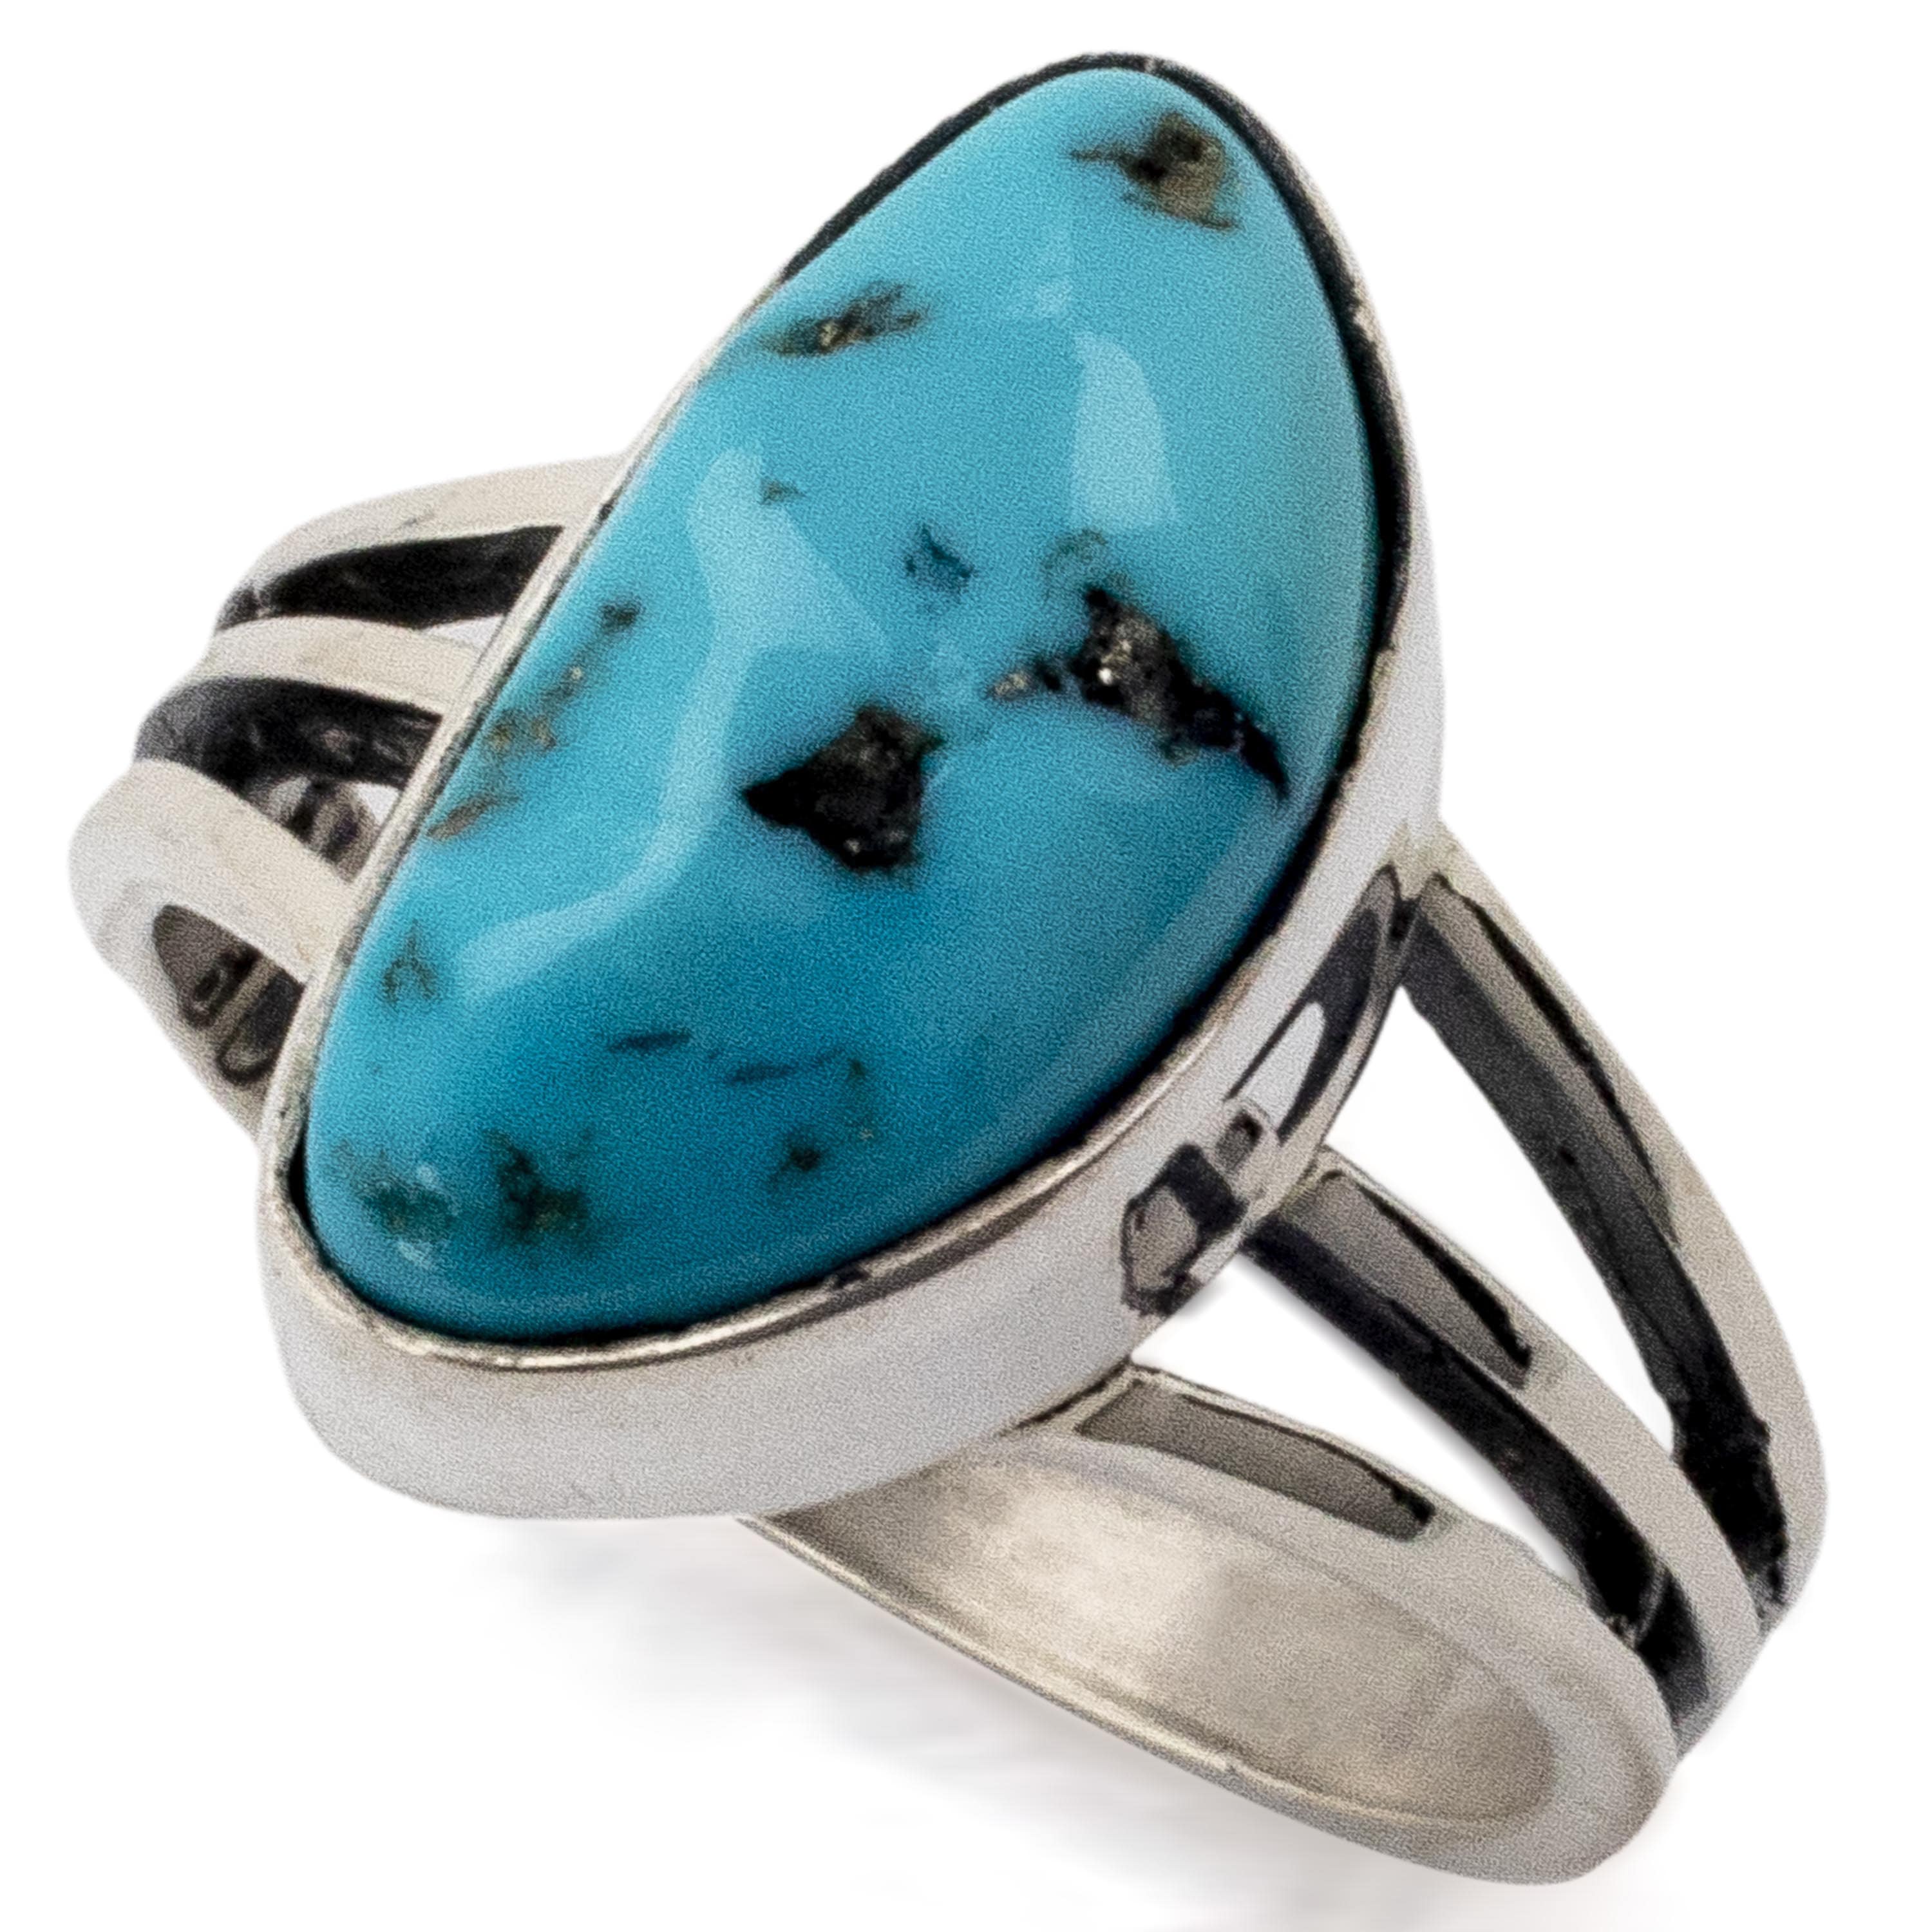 Kalifano Native American Jewelry 7.5 Sleeping Beauty Turquoise USA Handmade 925 Sterling Silver Ring NAR300.058.75